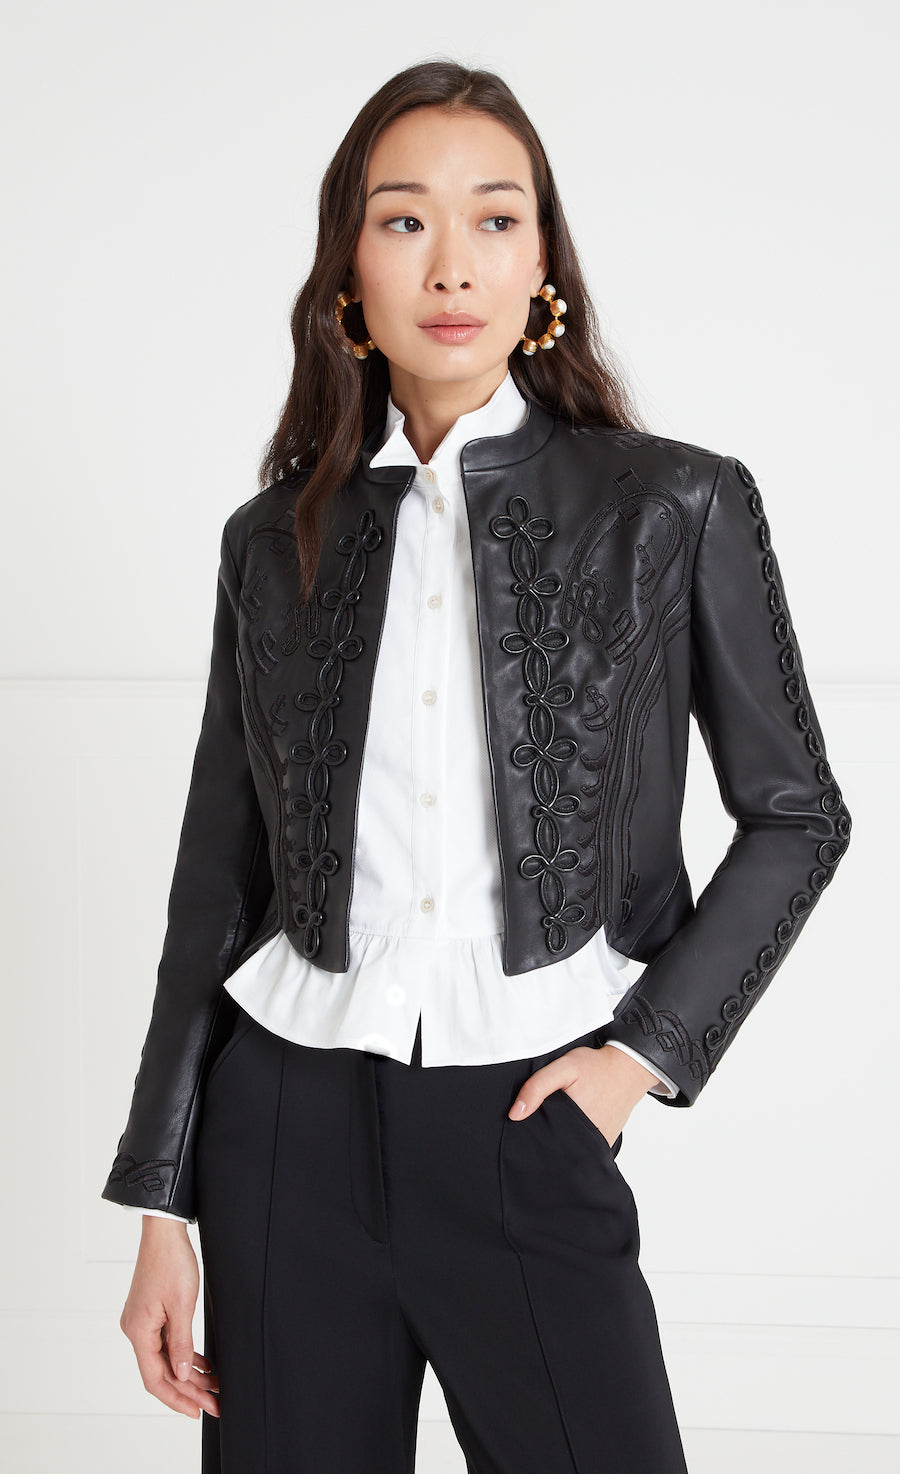 Women Black Leather Double-Breasted Coat OEM High Quality 100% Leather Coats  Spring Autumn for Daily Wear - China Clothing and Fashion Clothes price |  Made-in-China.com